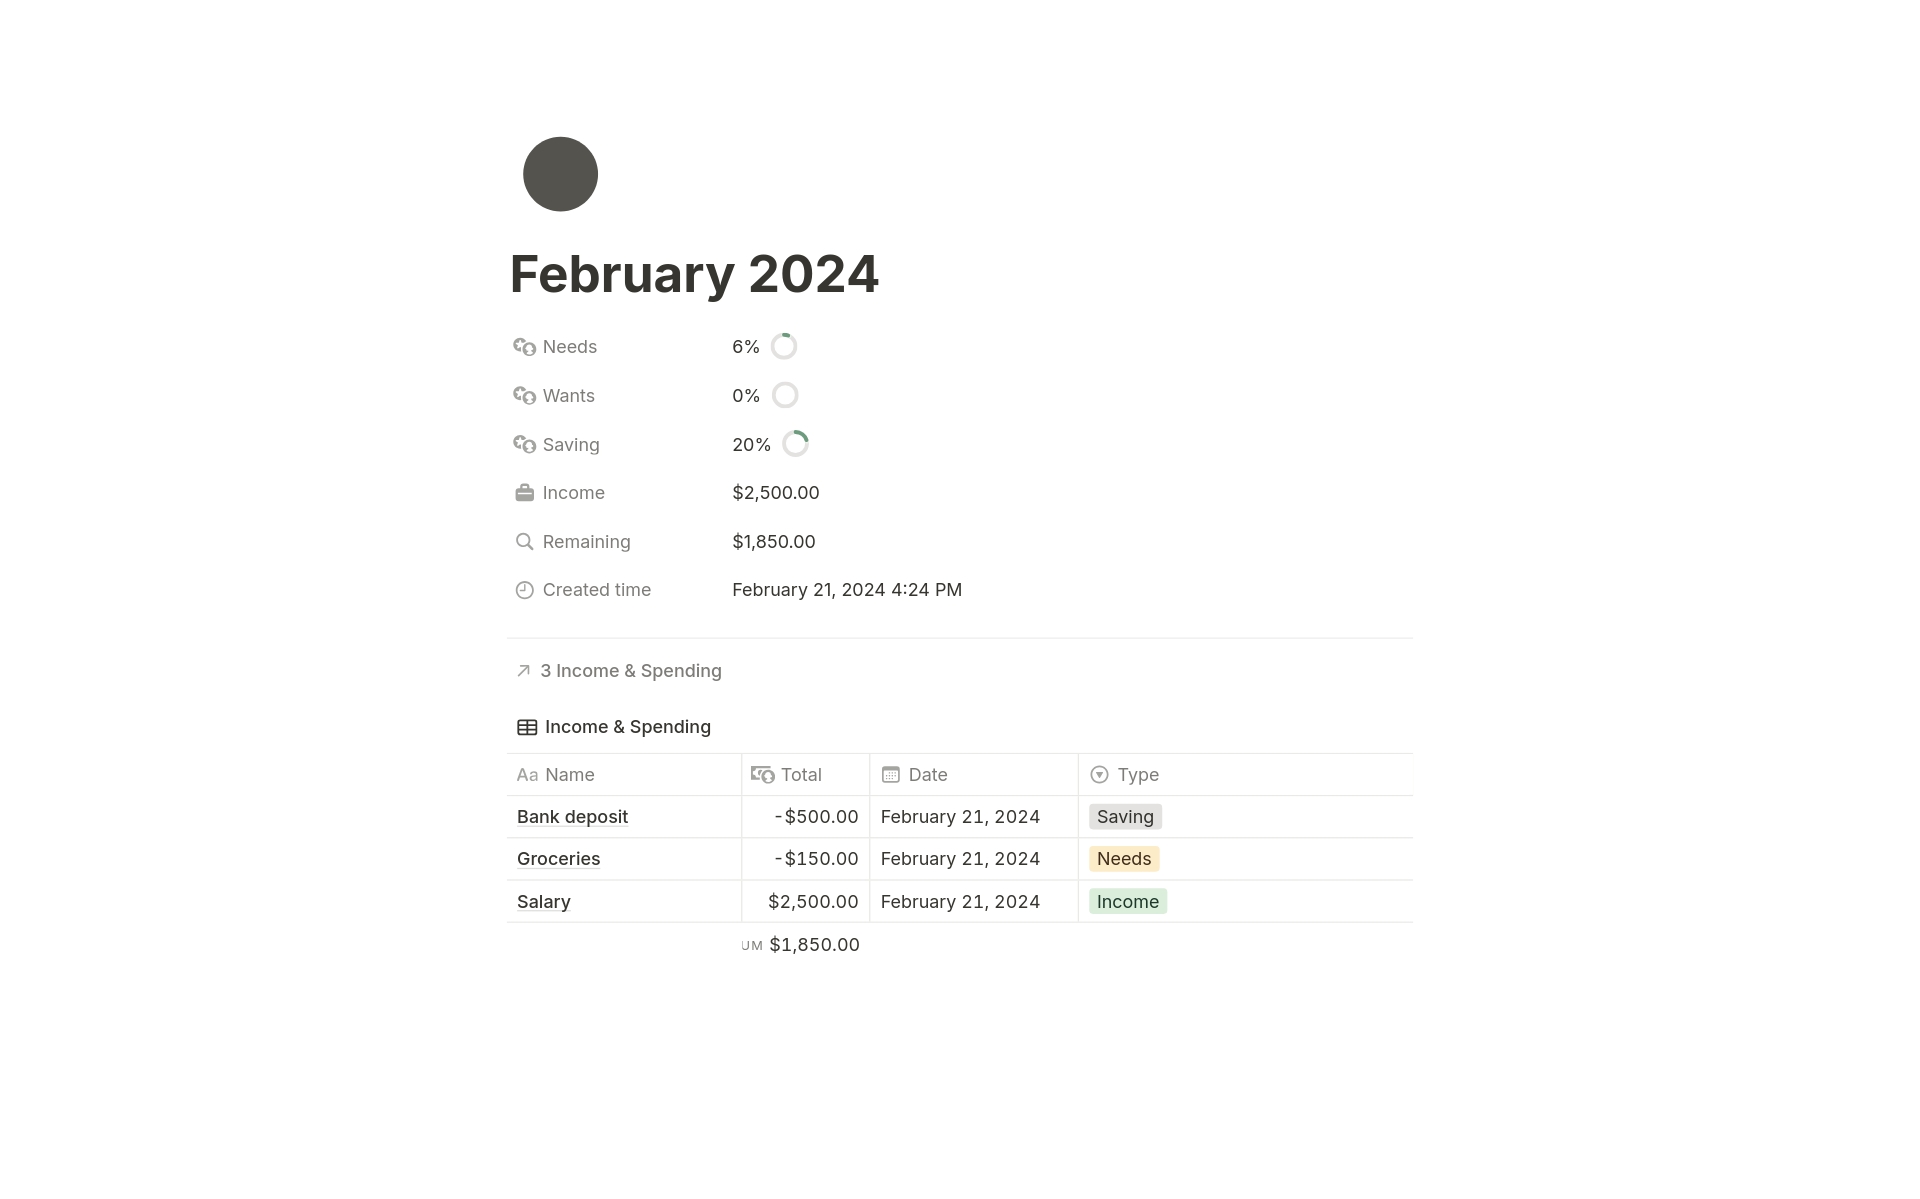 💰 Have you heard of the 50/30/20 budget rule? This principle offers an effective strategy for managing your finances: spend 50% on needs, 30% on wants, and set aside 20% for savings or debt repayment. Notion is a great tool for building a 50/30/20 rule budget tracker! 